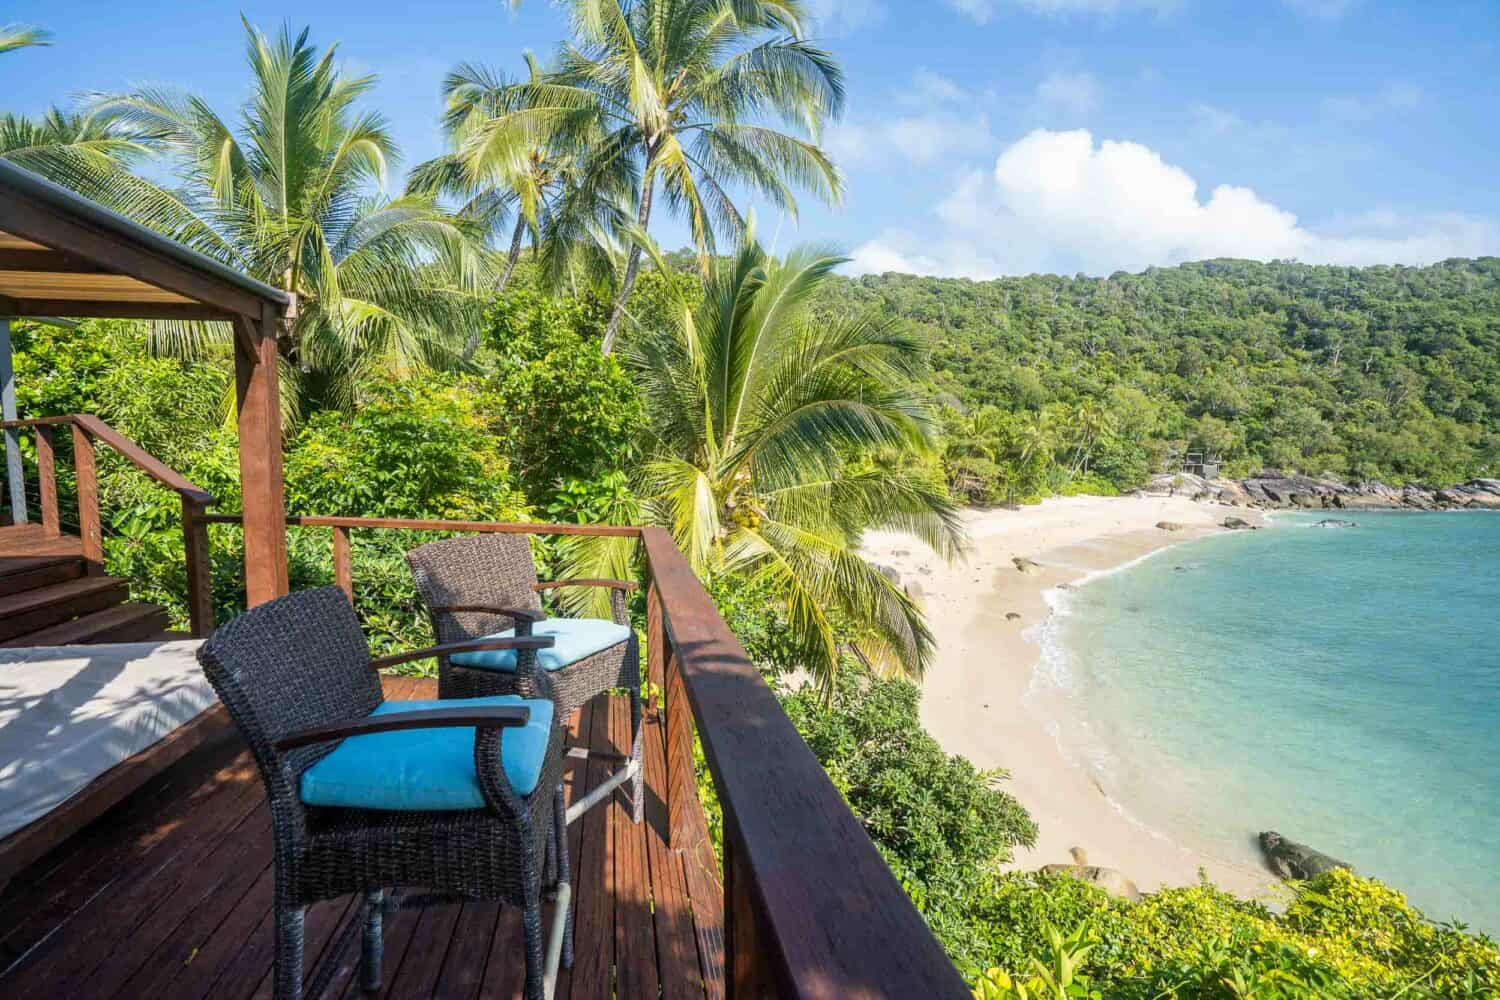 The view from the Treehouse Villa deck at Bedarra Island Resort, Queensland